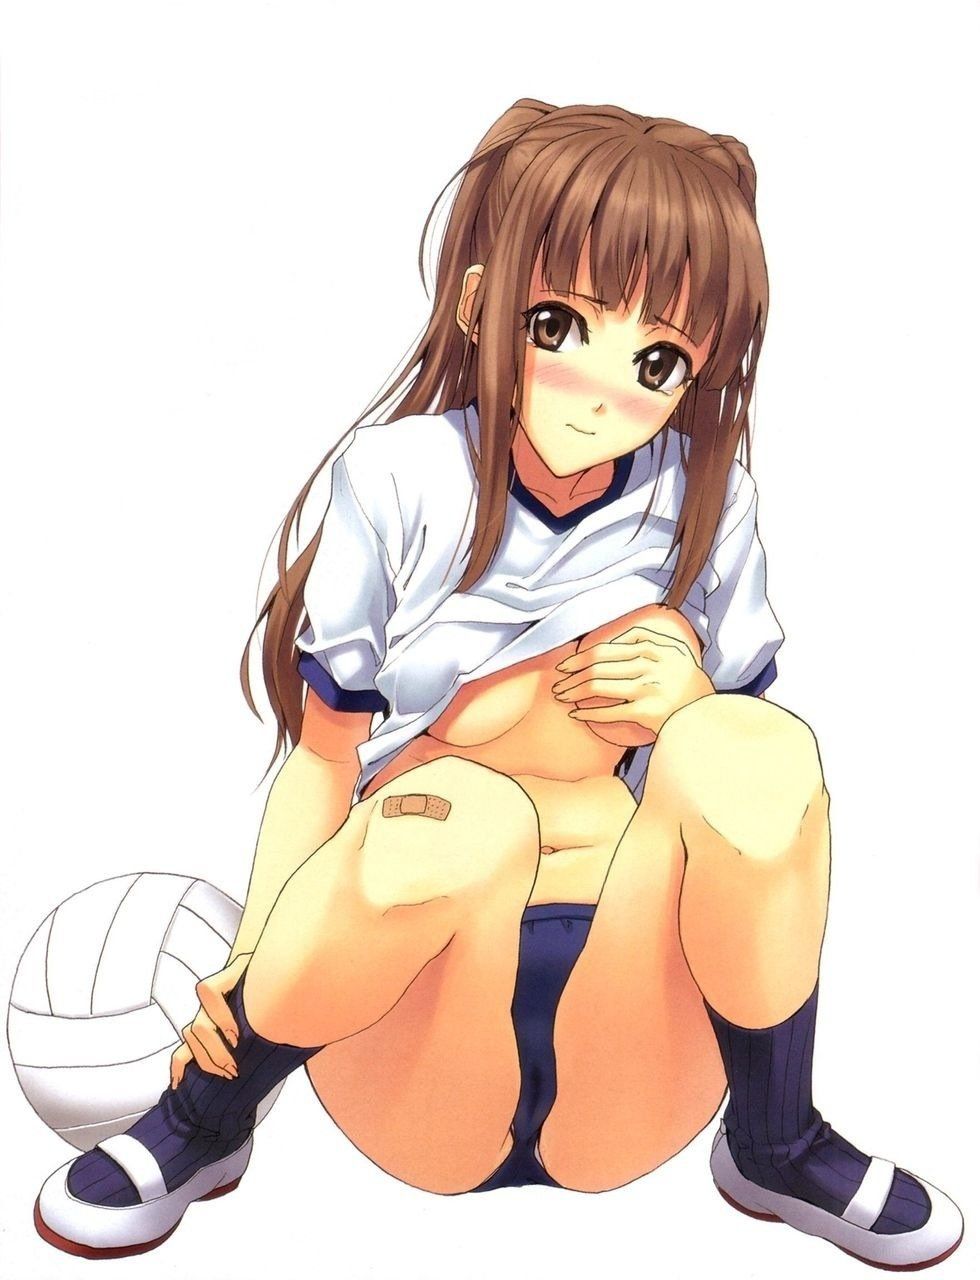 [some senses of incongruity] the second eroticism image which wear the top though is bloomers, a gym suit, and wear 14